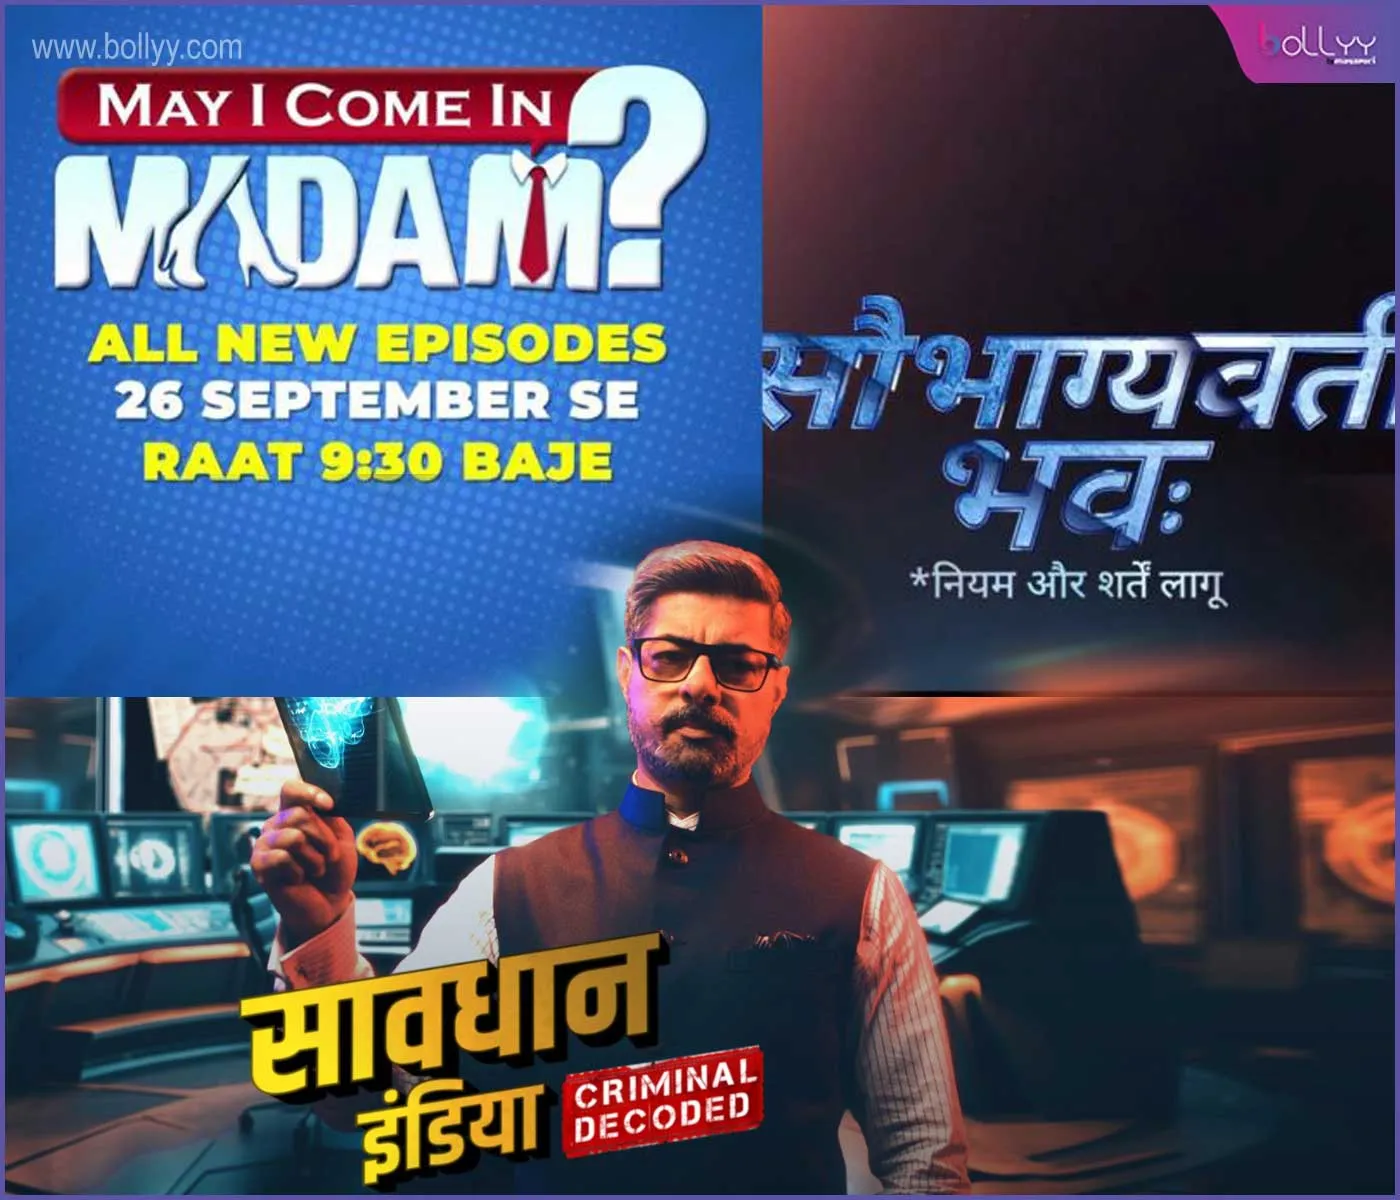 Star Bharat has launched three of the audience's favorite shows 'Saubhagyavati Bhava: Niyam Aur Shrete Lagoo,' 'Savdhaan India's new theme Criminal Decoded,' and 'May I Come in Madam? Announcing the return of!